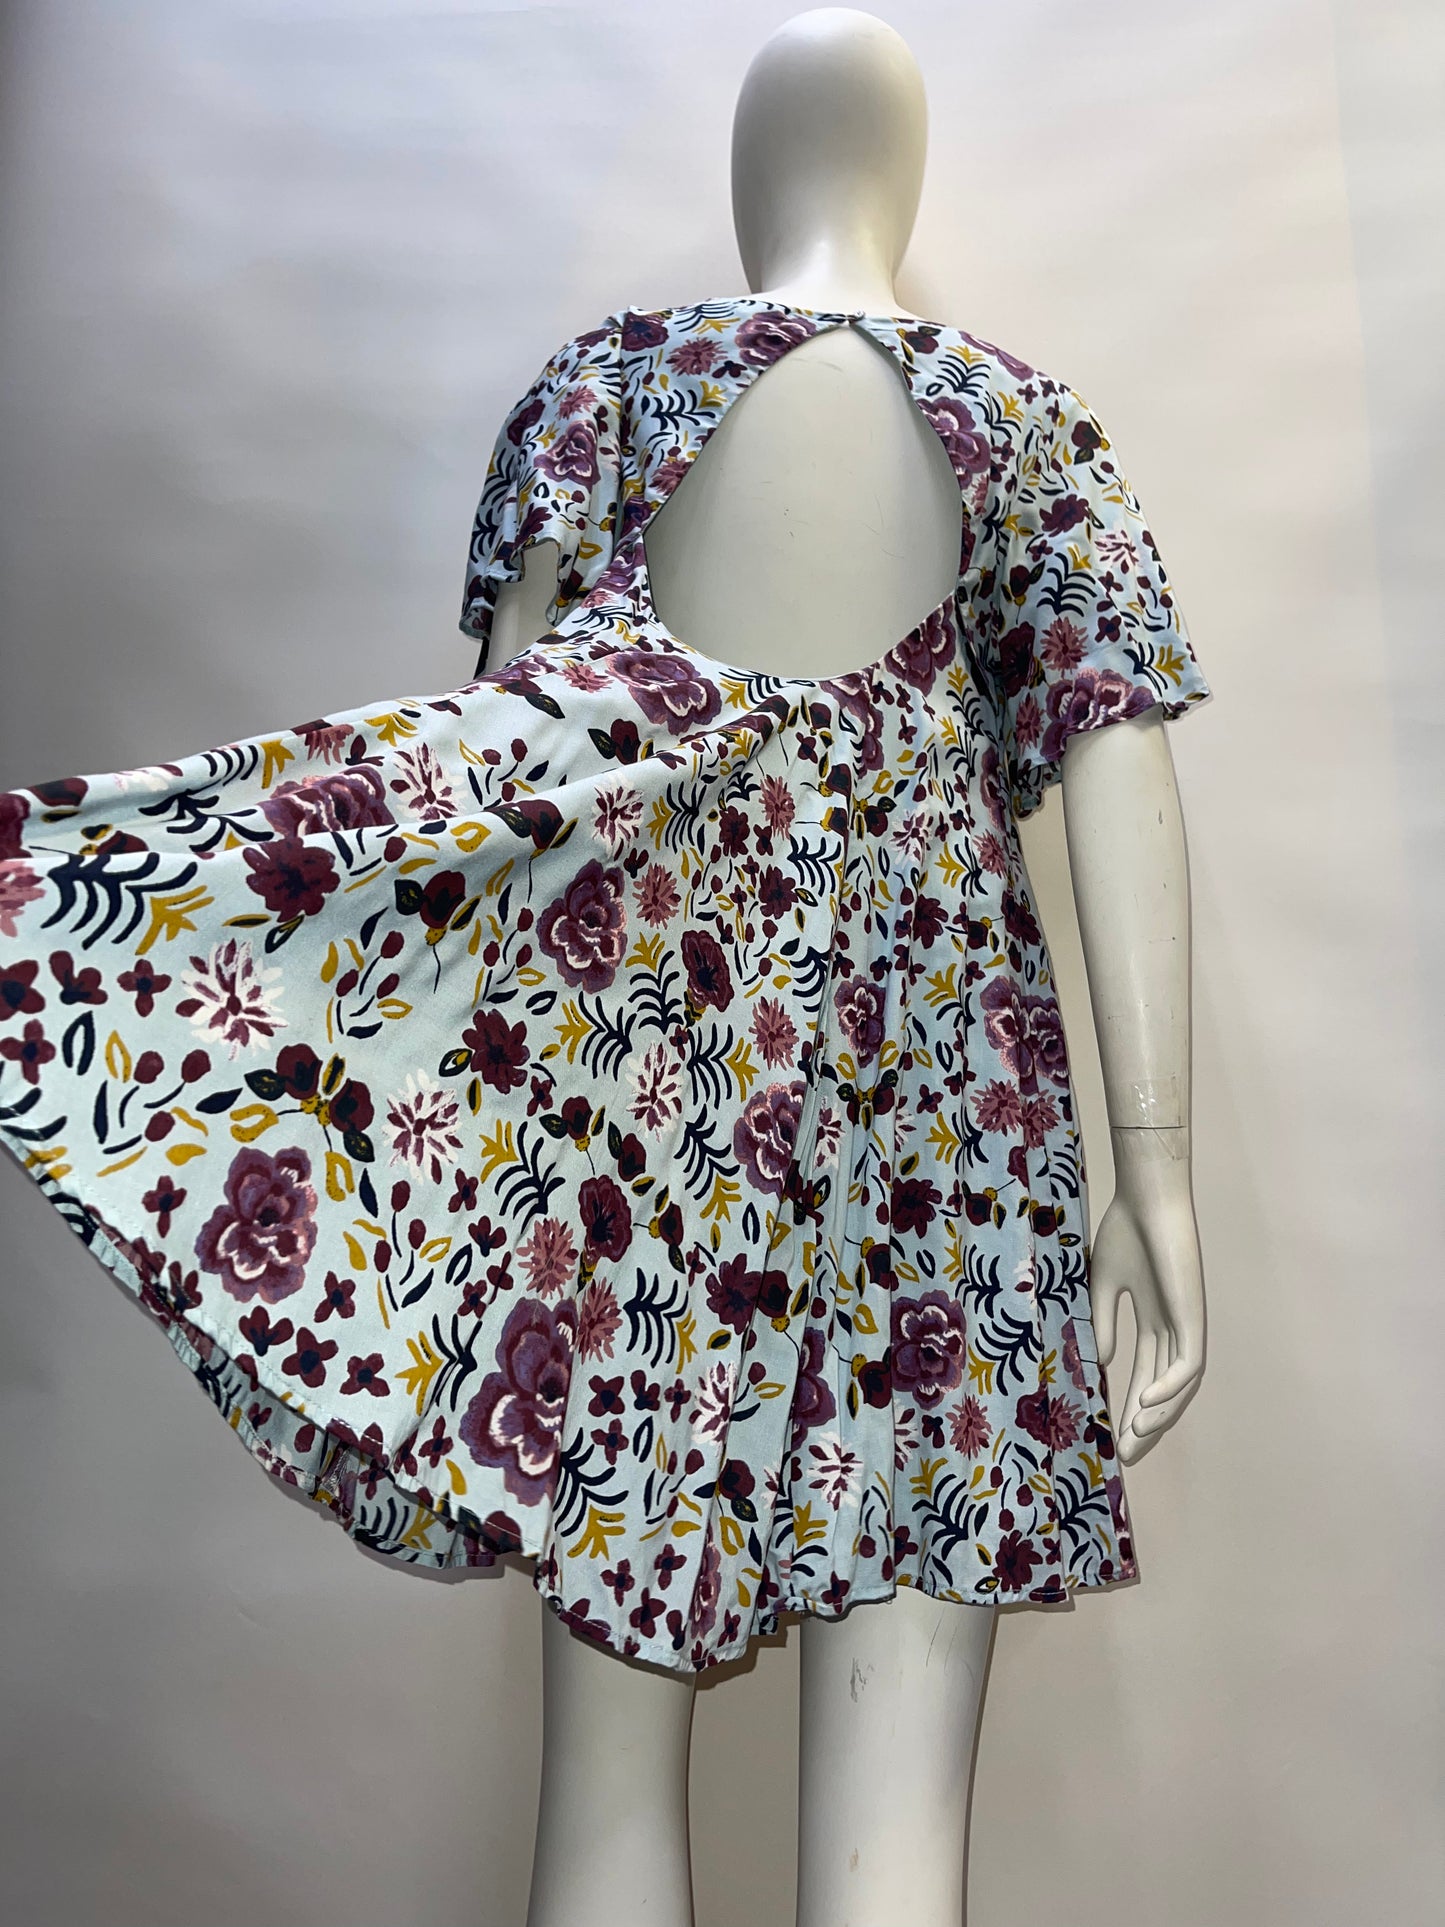 Urban Outfitters Open Back Floral Mini (SzM)